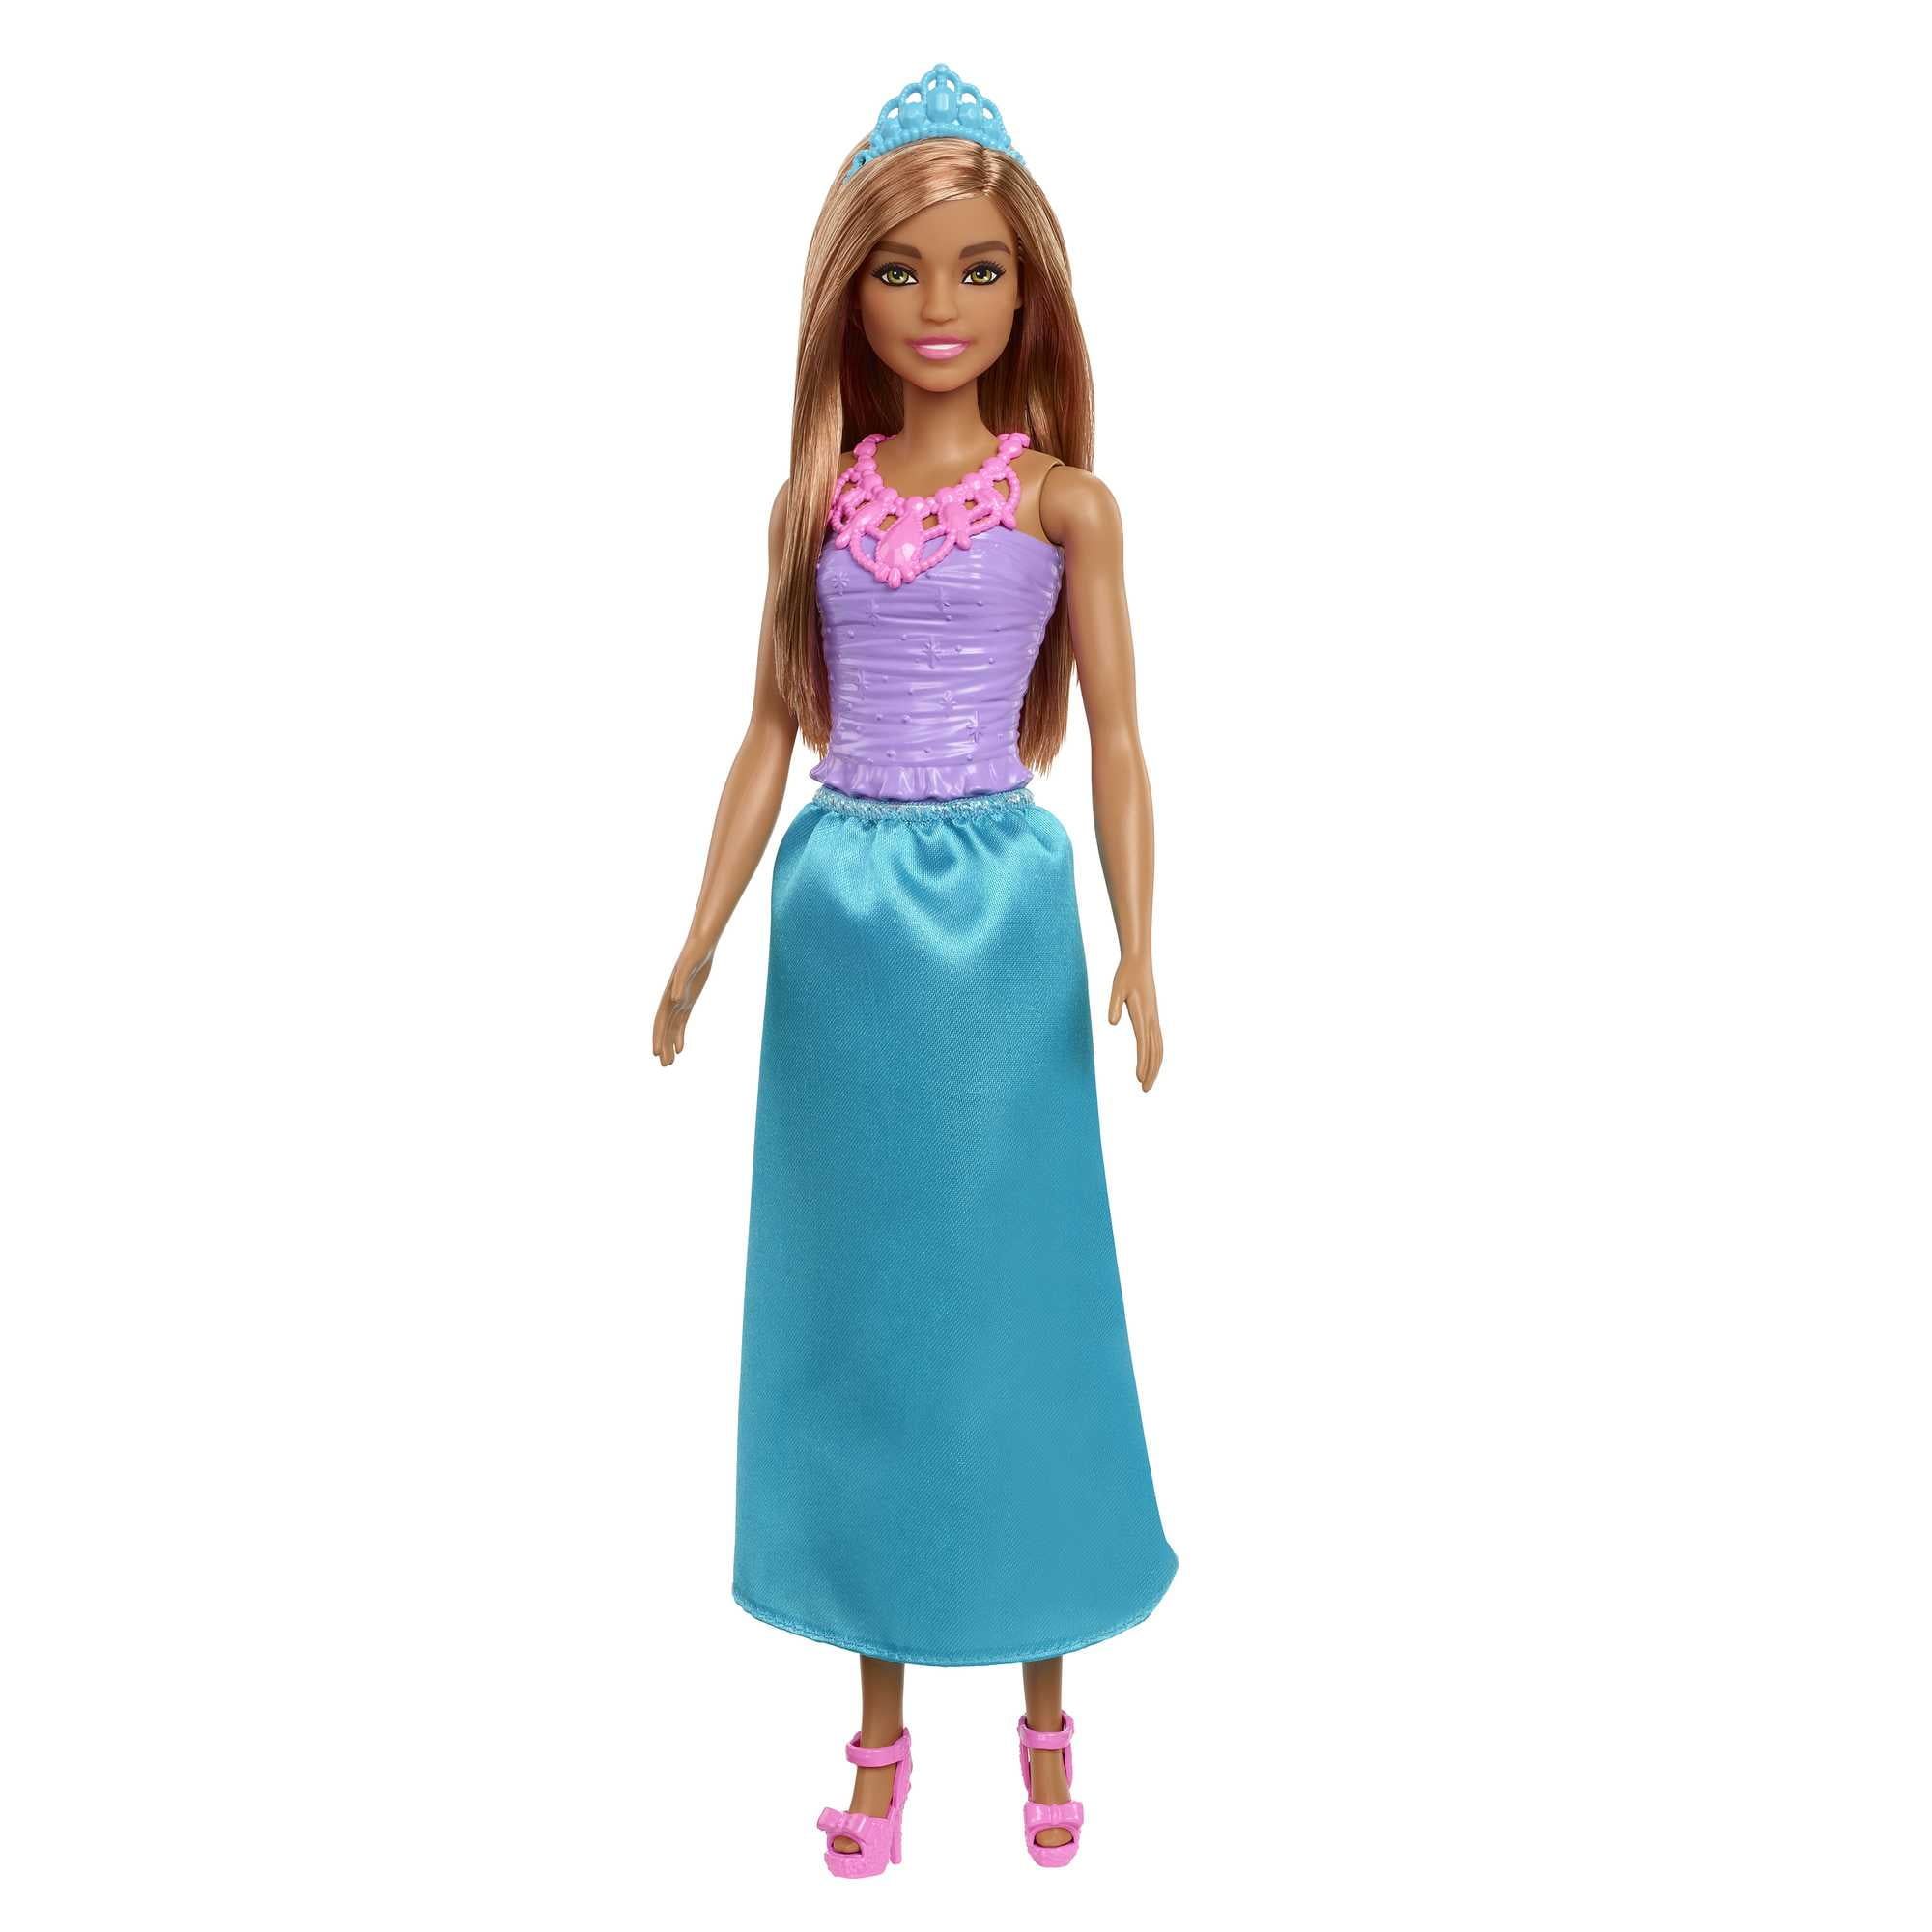 Barbie Dreamtopia Doll & Accessories, Brunette Hair with Removable Blue Skirt, Shoes | Walmart (US)